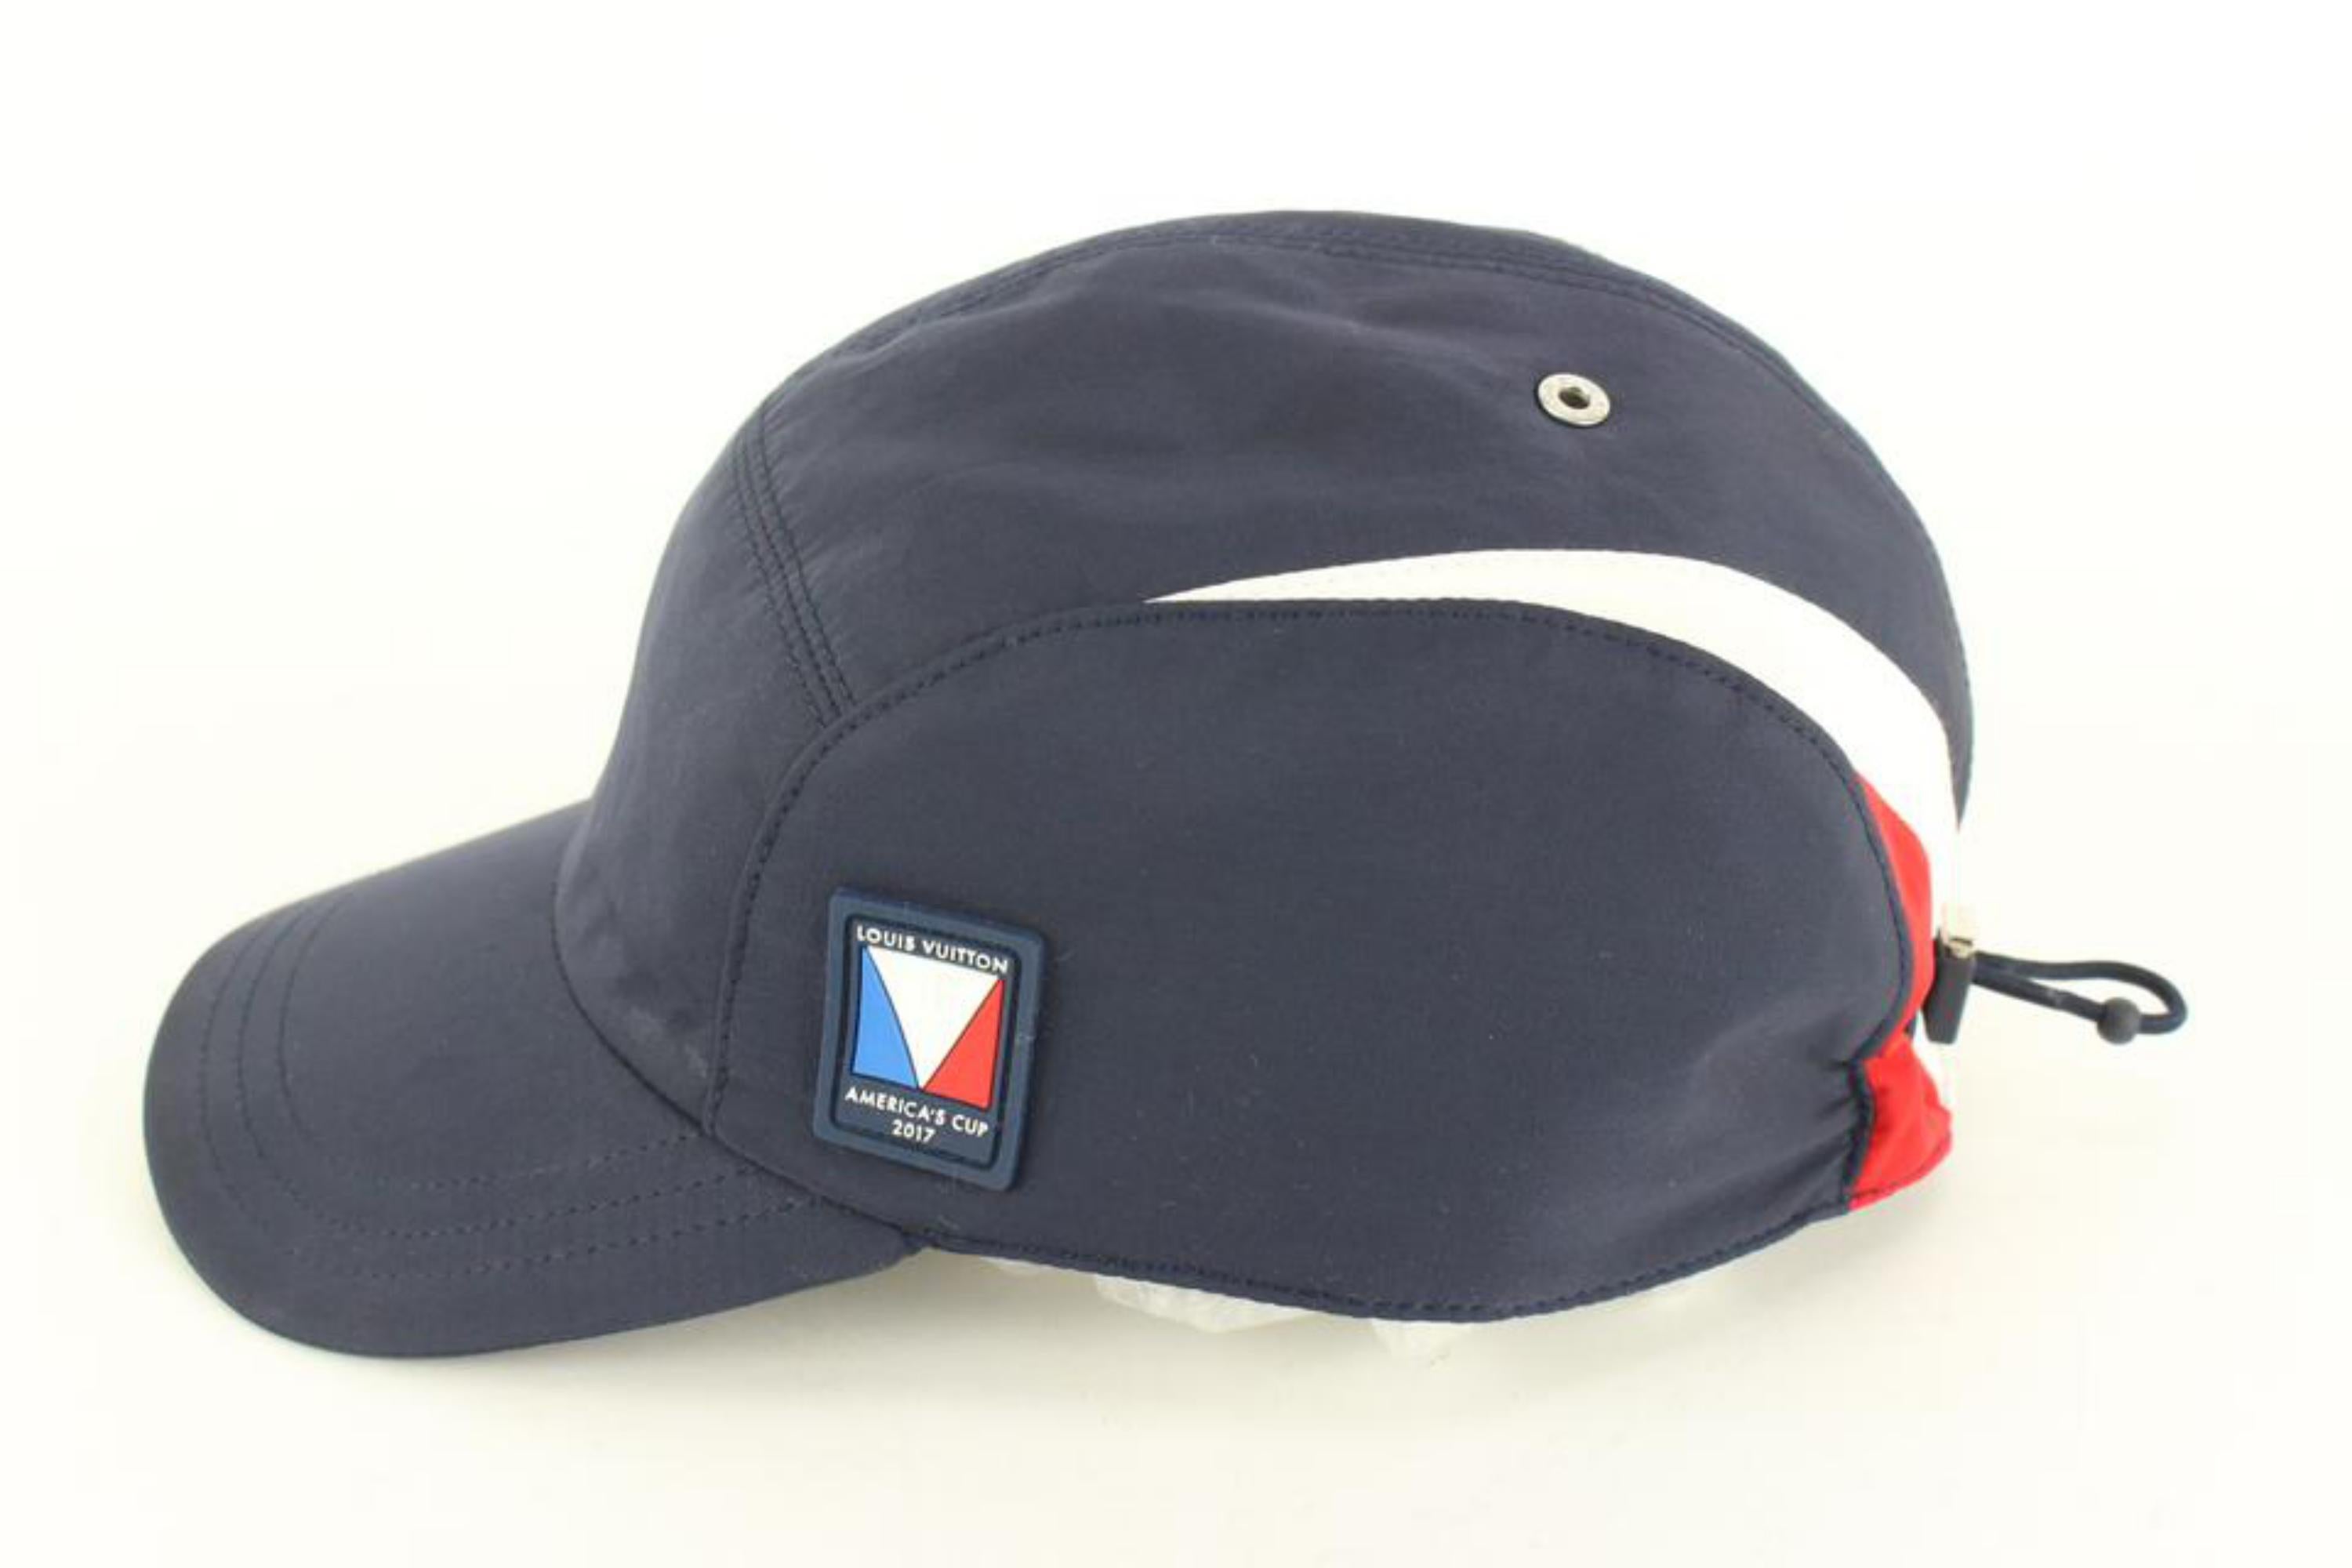 Louis Vuitton Navy 2017 LV America's Cup Hat 3lk59s In Excellent Condition For Sale In Dix hills, NY